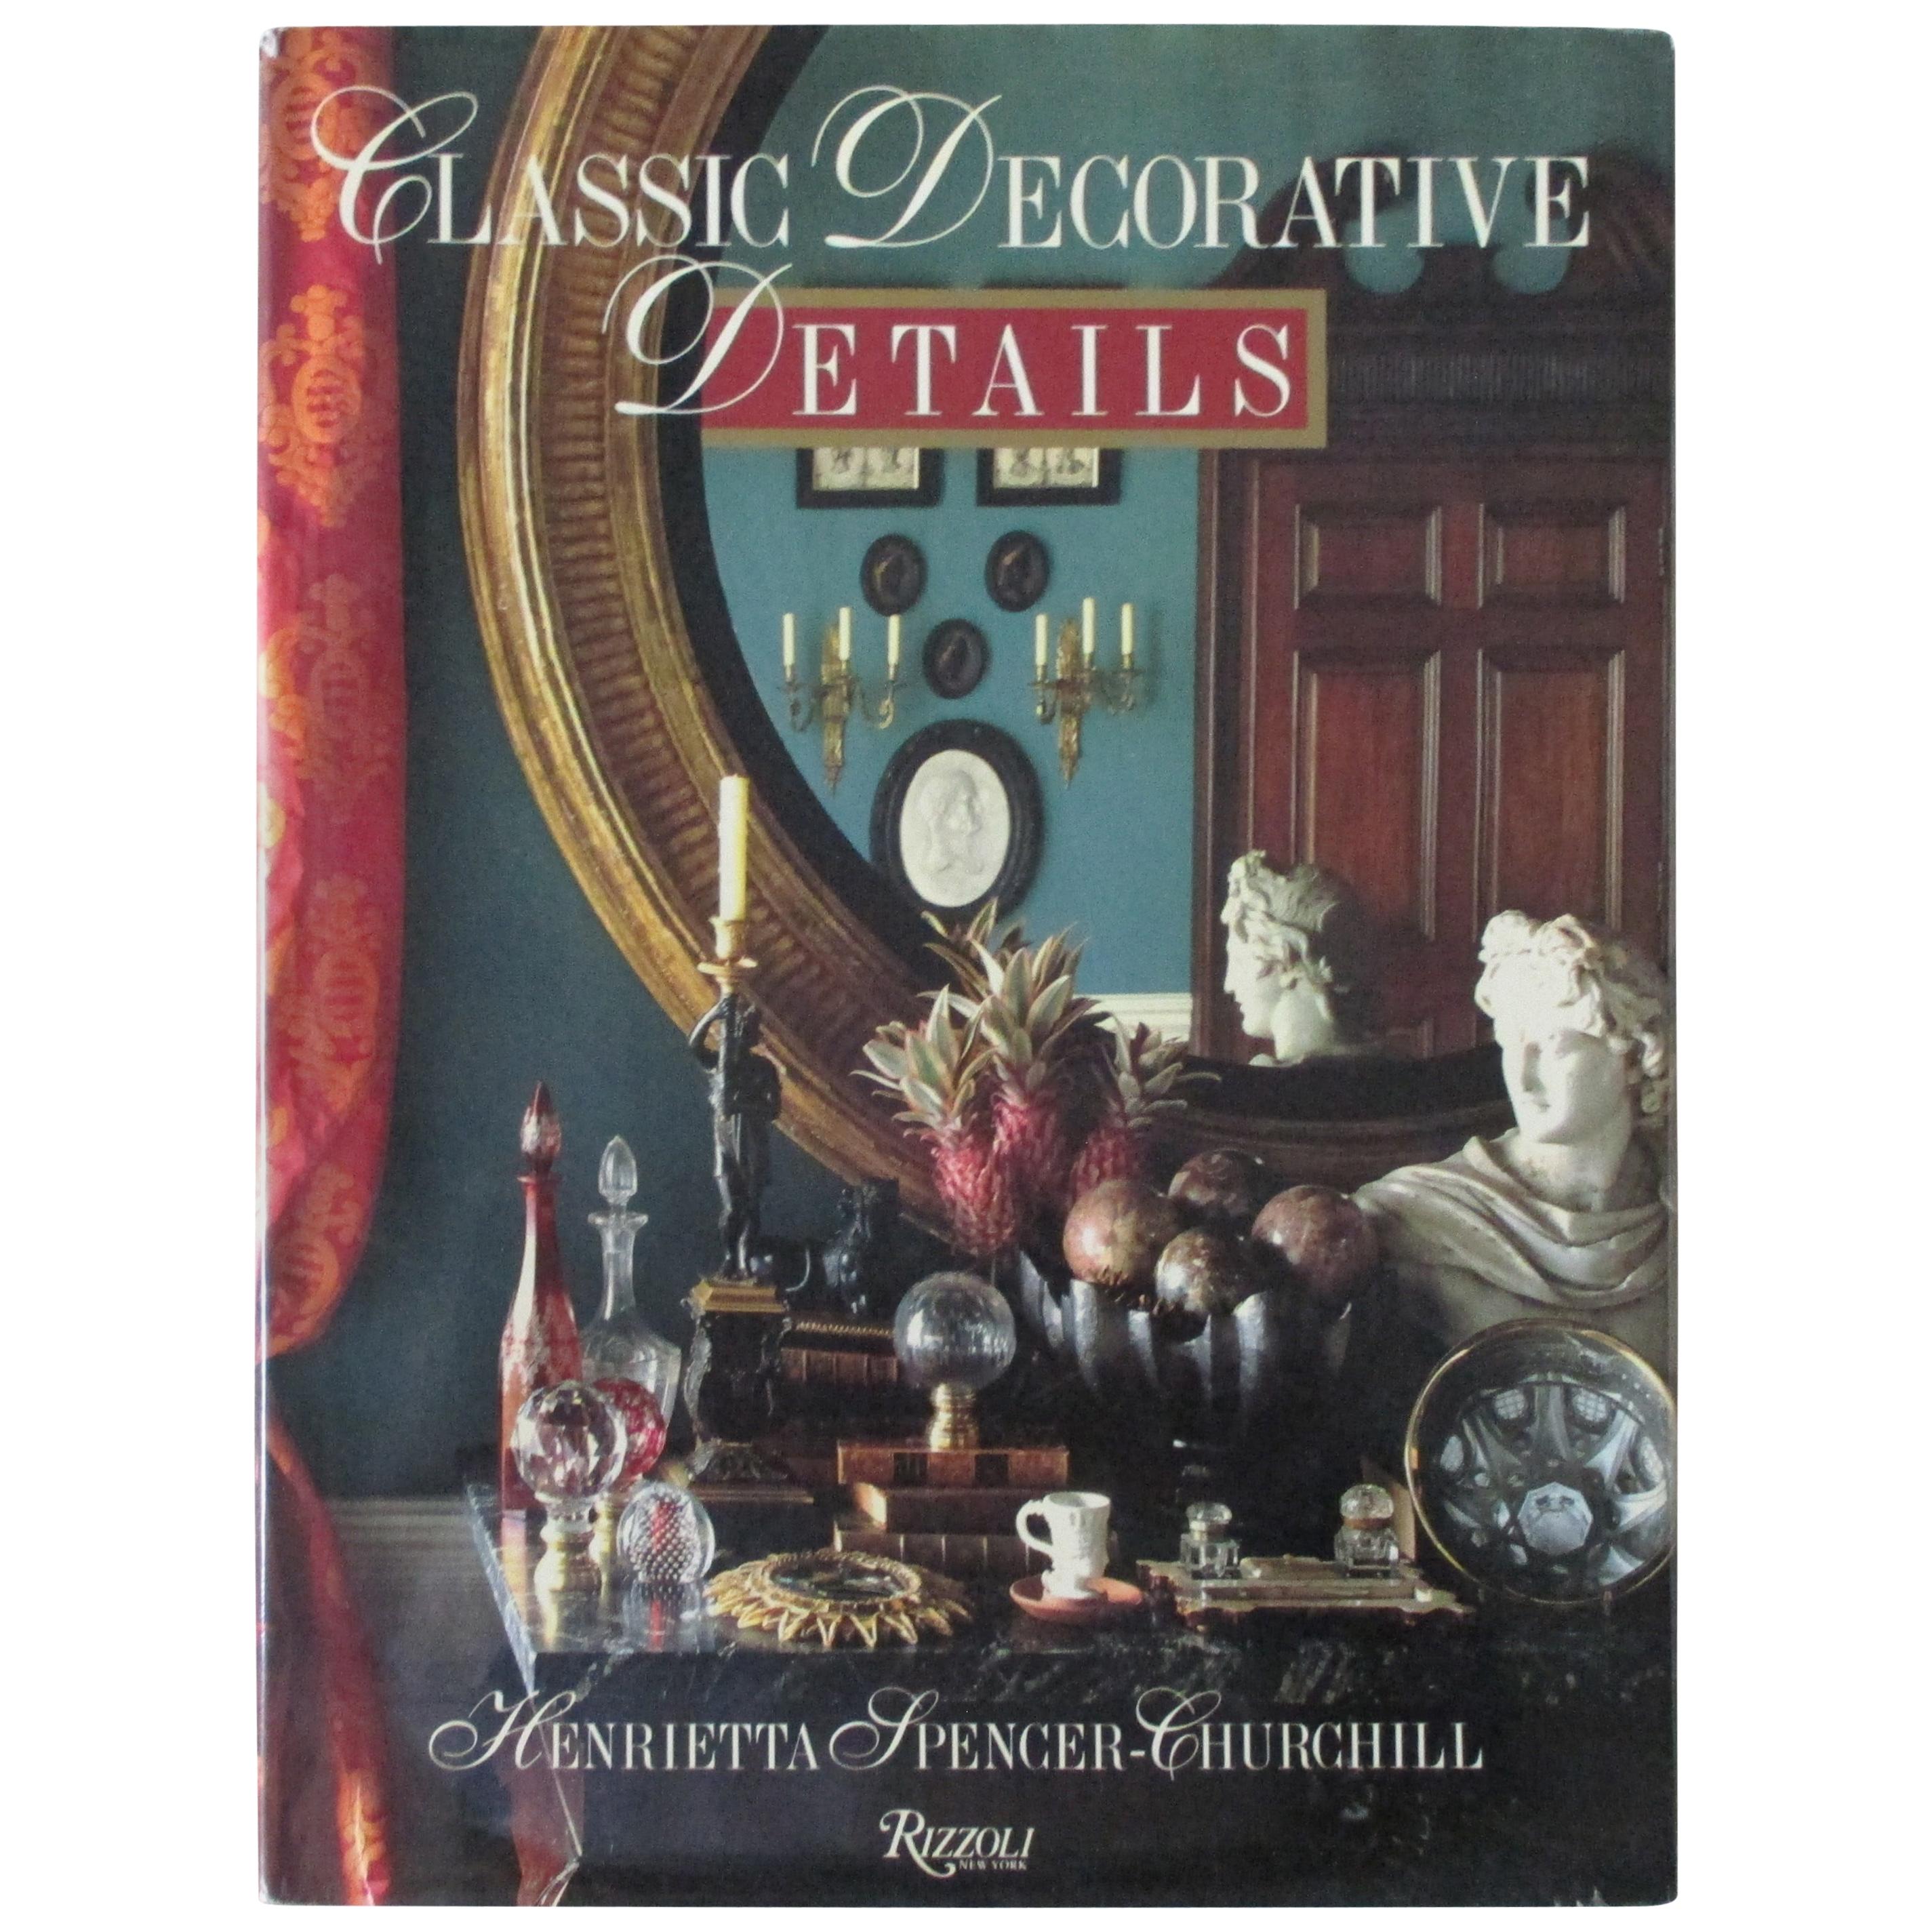 'Classic Decorative Details Hardcover' Book by H. Spencer-Churchill